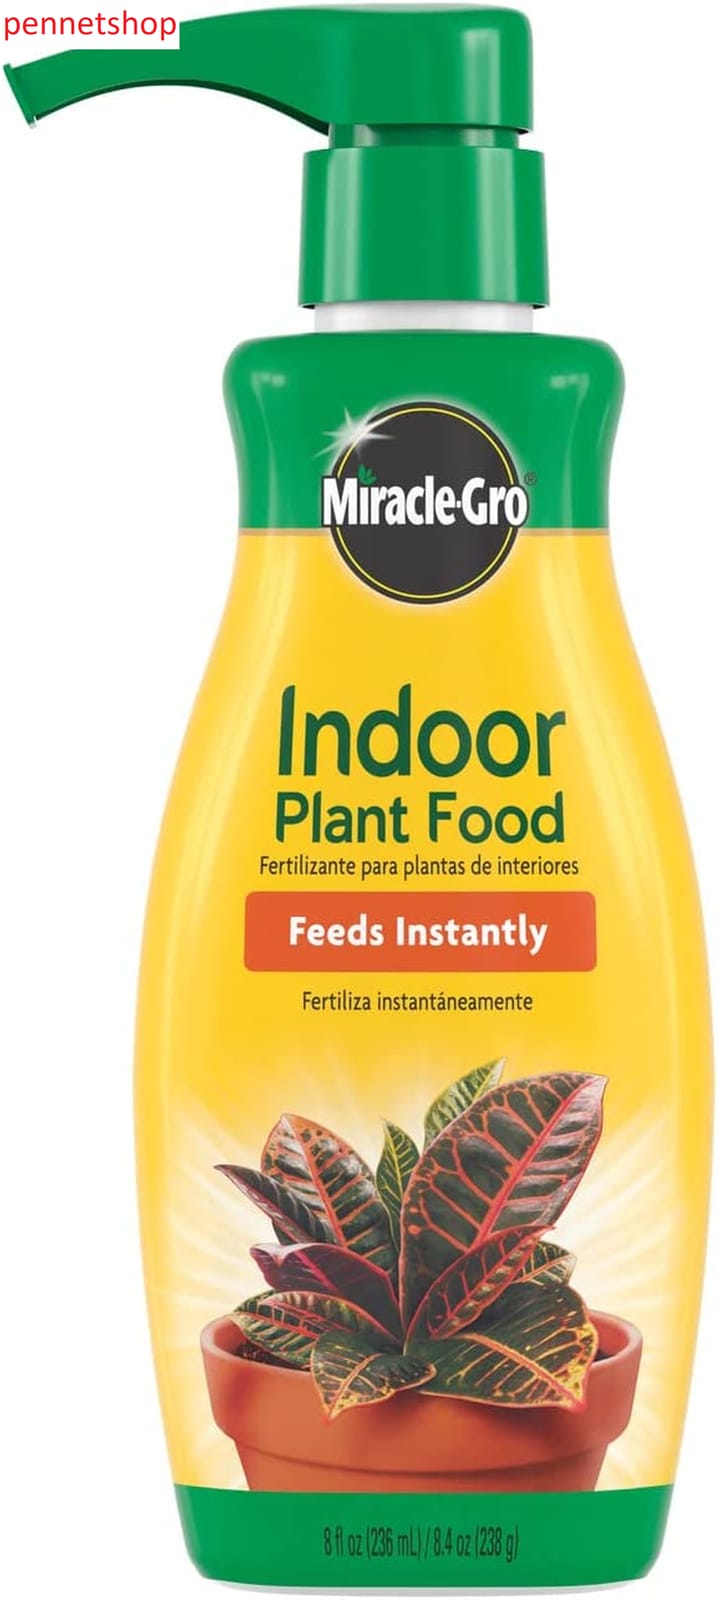 Miracle-Gro Indoor Plant Food is great for use on all indoor plants